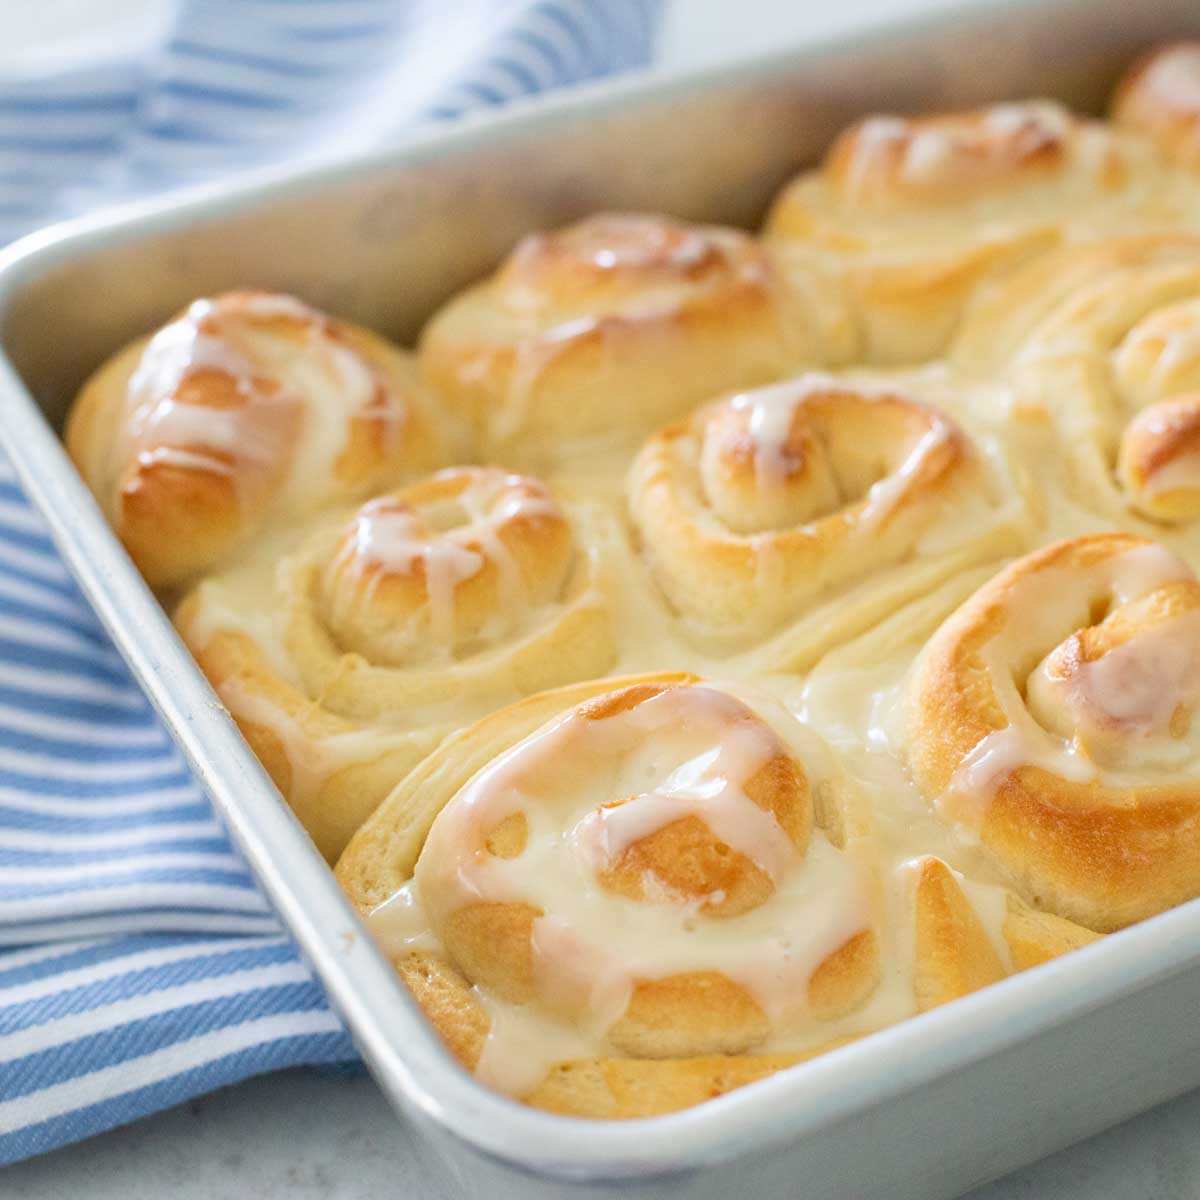 A baking pan filled with finished orange rolls sits on a blue towel.